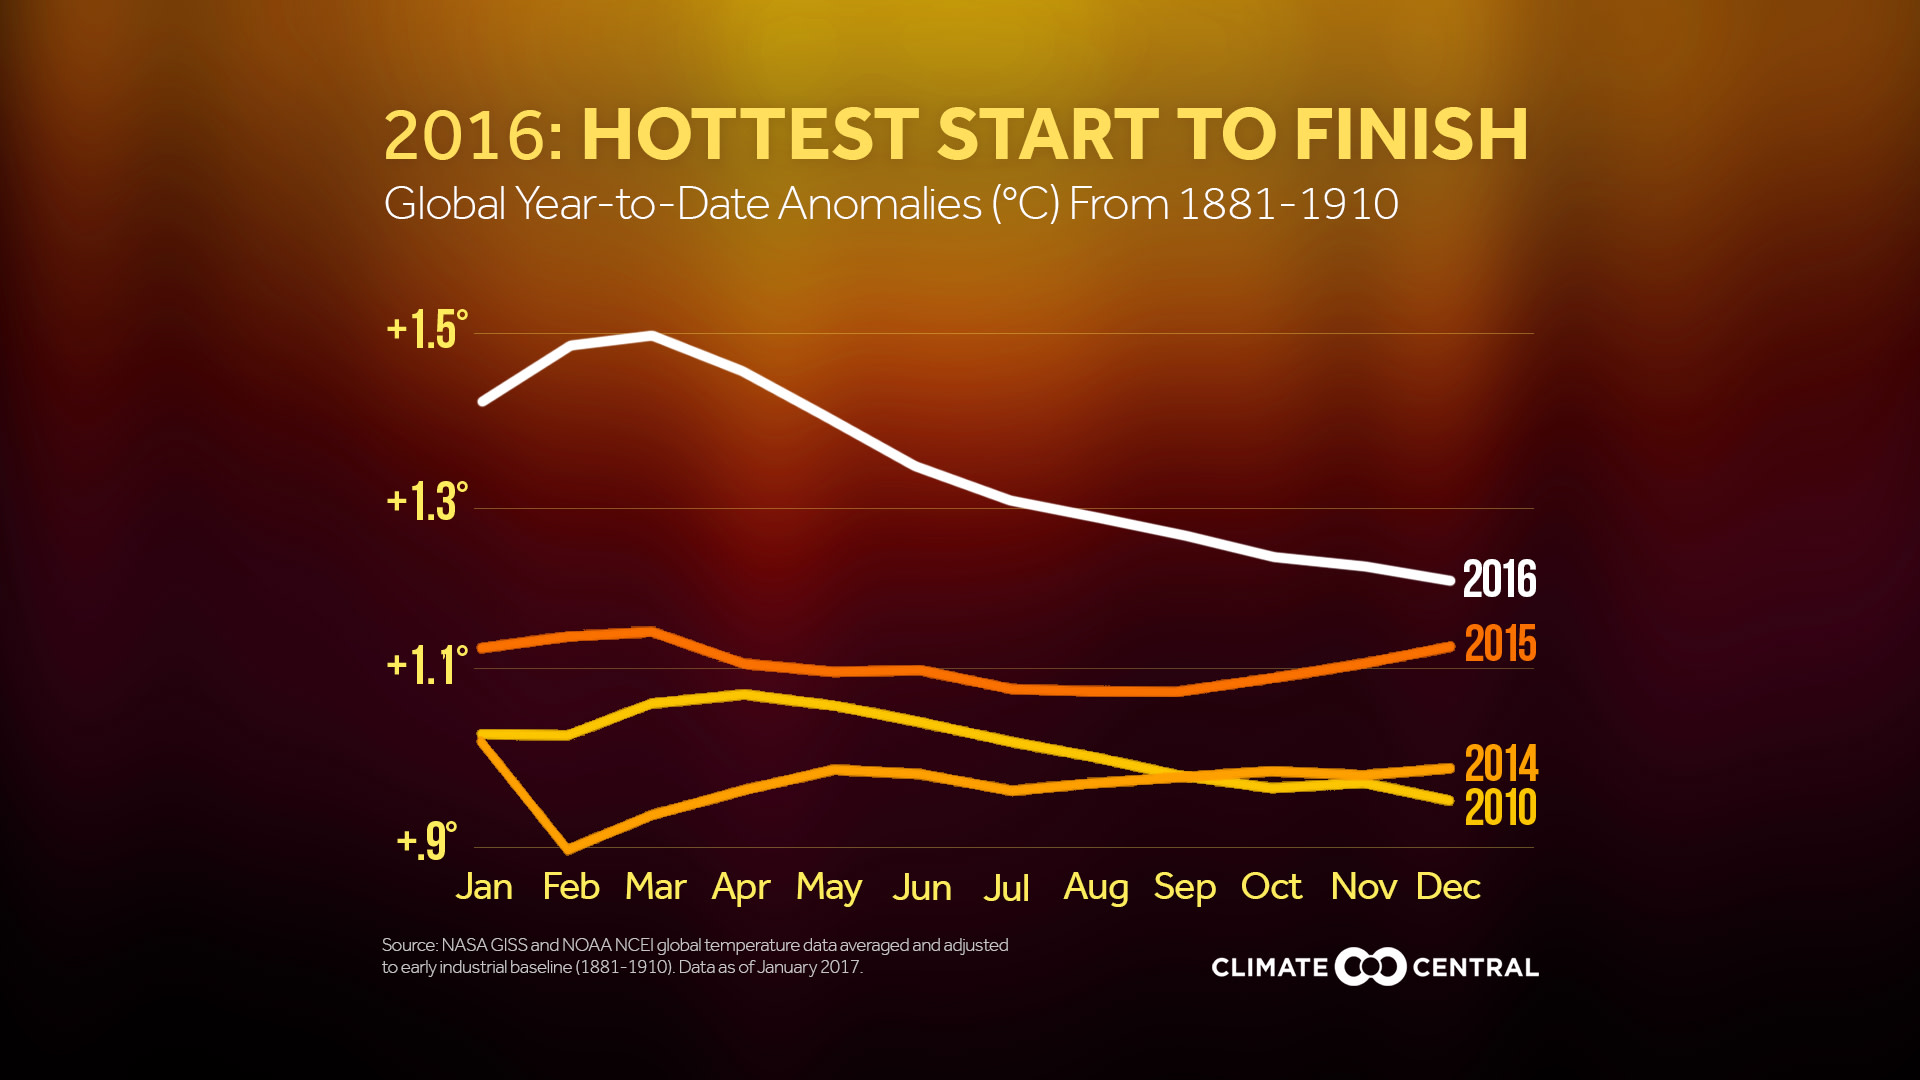 Set 3 - 2016: Hottest Year on Record